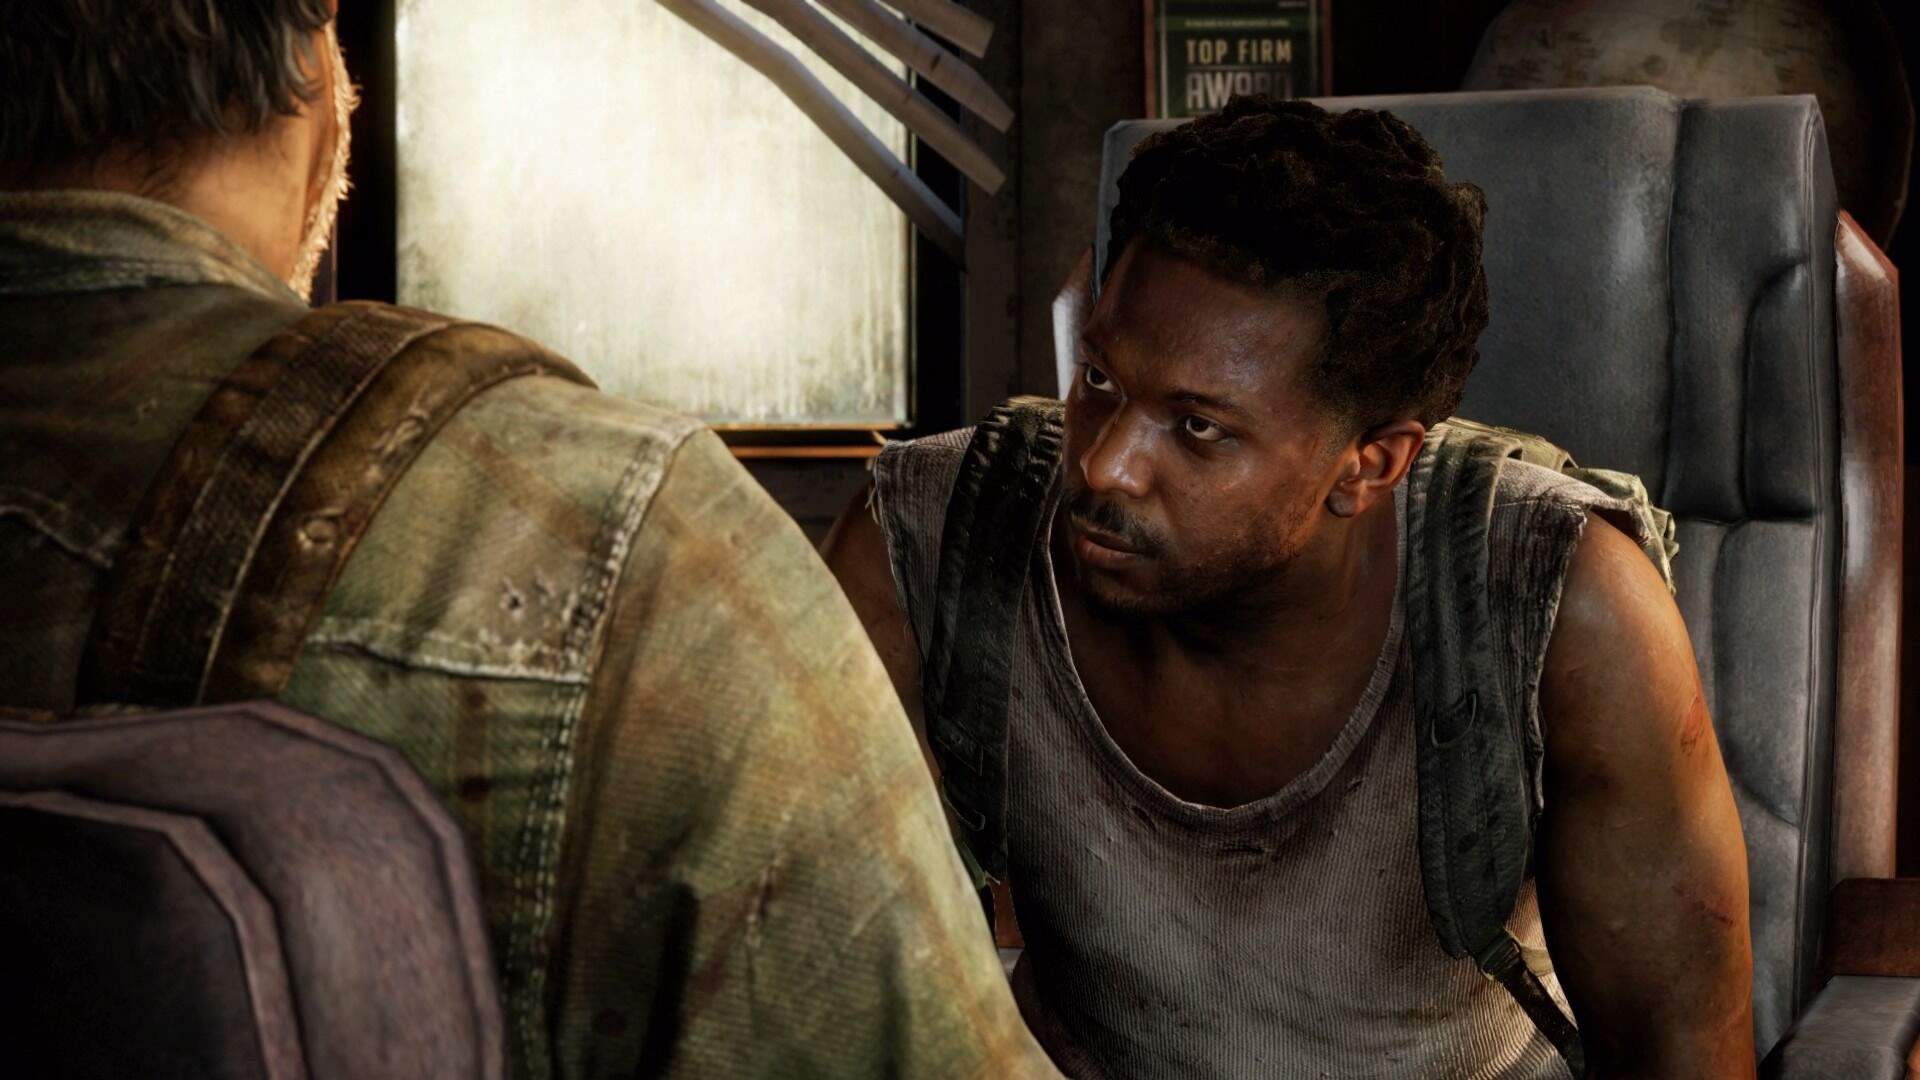 The Last of Us episode 4: Who are Henry and Sam and are they in video game?